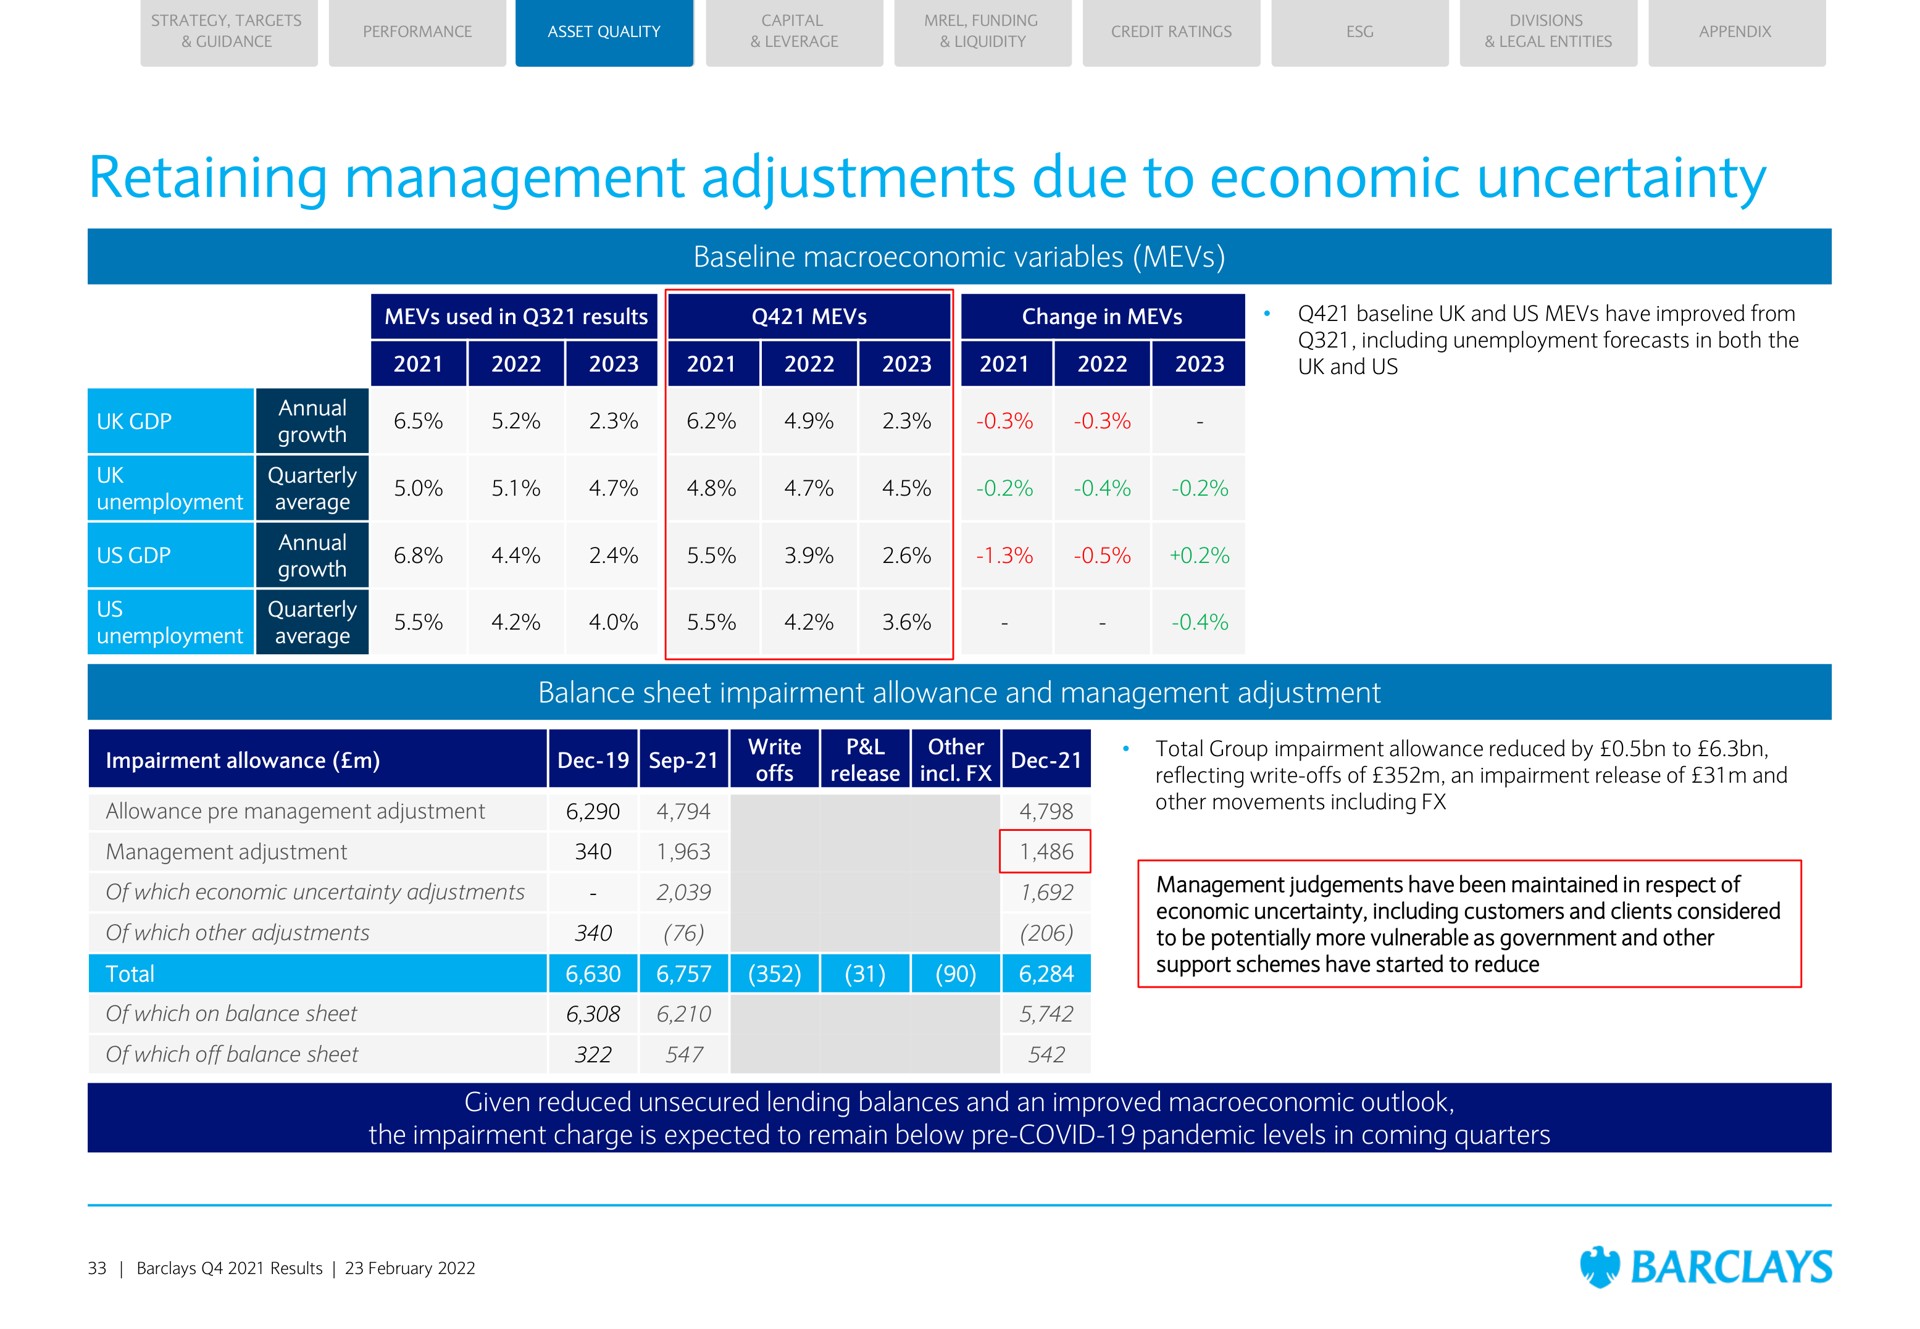 retaining management adjustments due to economic uncertainty variables balance sheet impairment allowance and management adjustment given reduced unsecured lending balances and an improved outlook the impairment charge is expected to remain below covid pandemic levels in coming quarters | Barclays